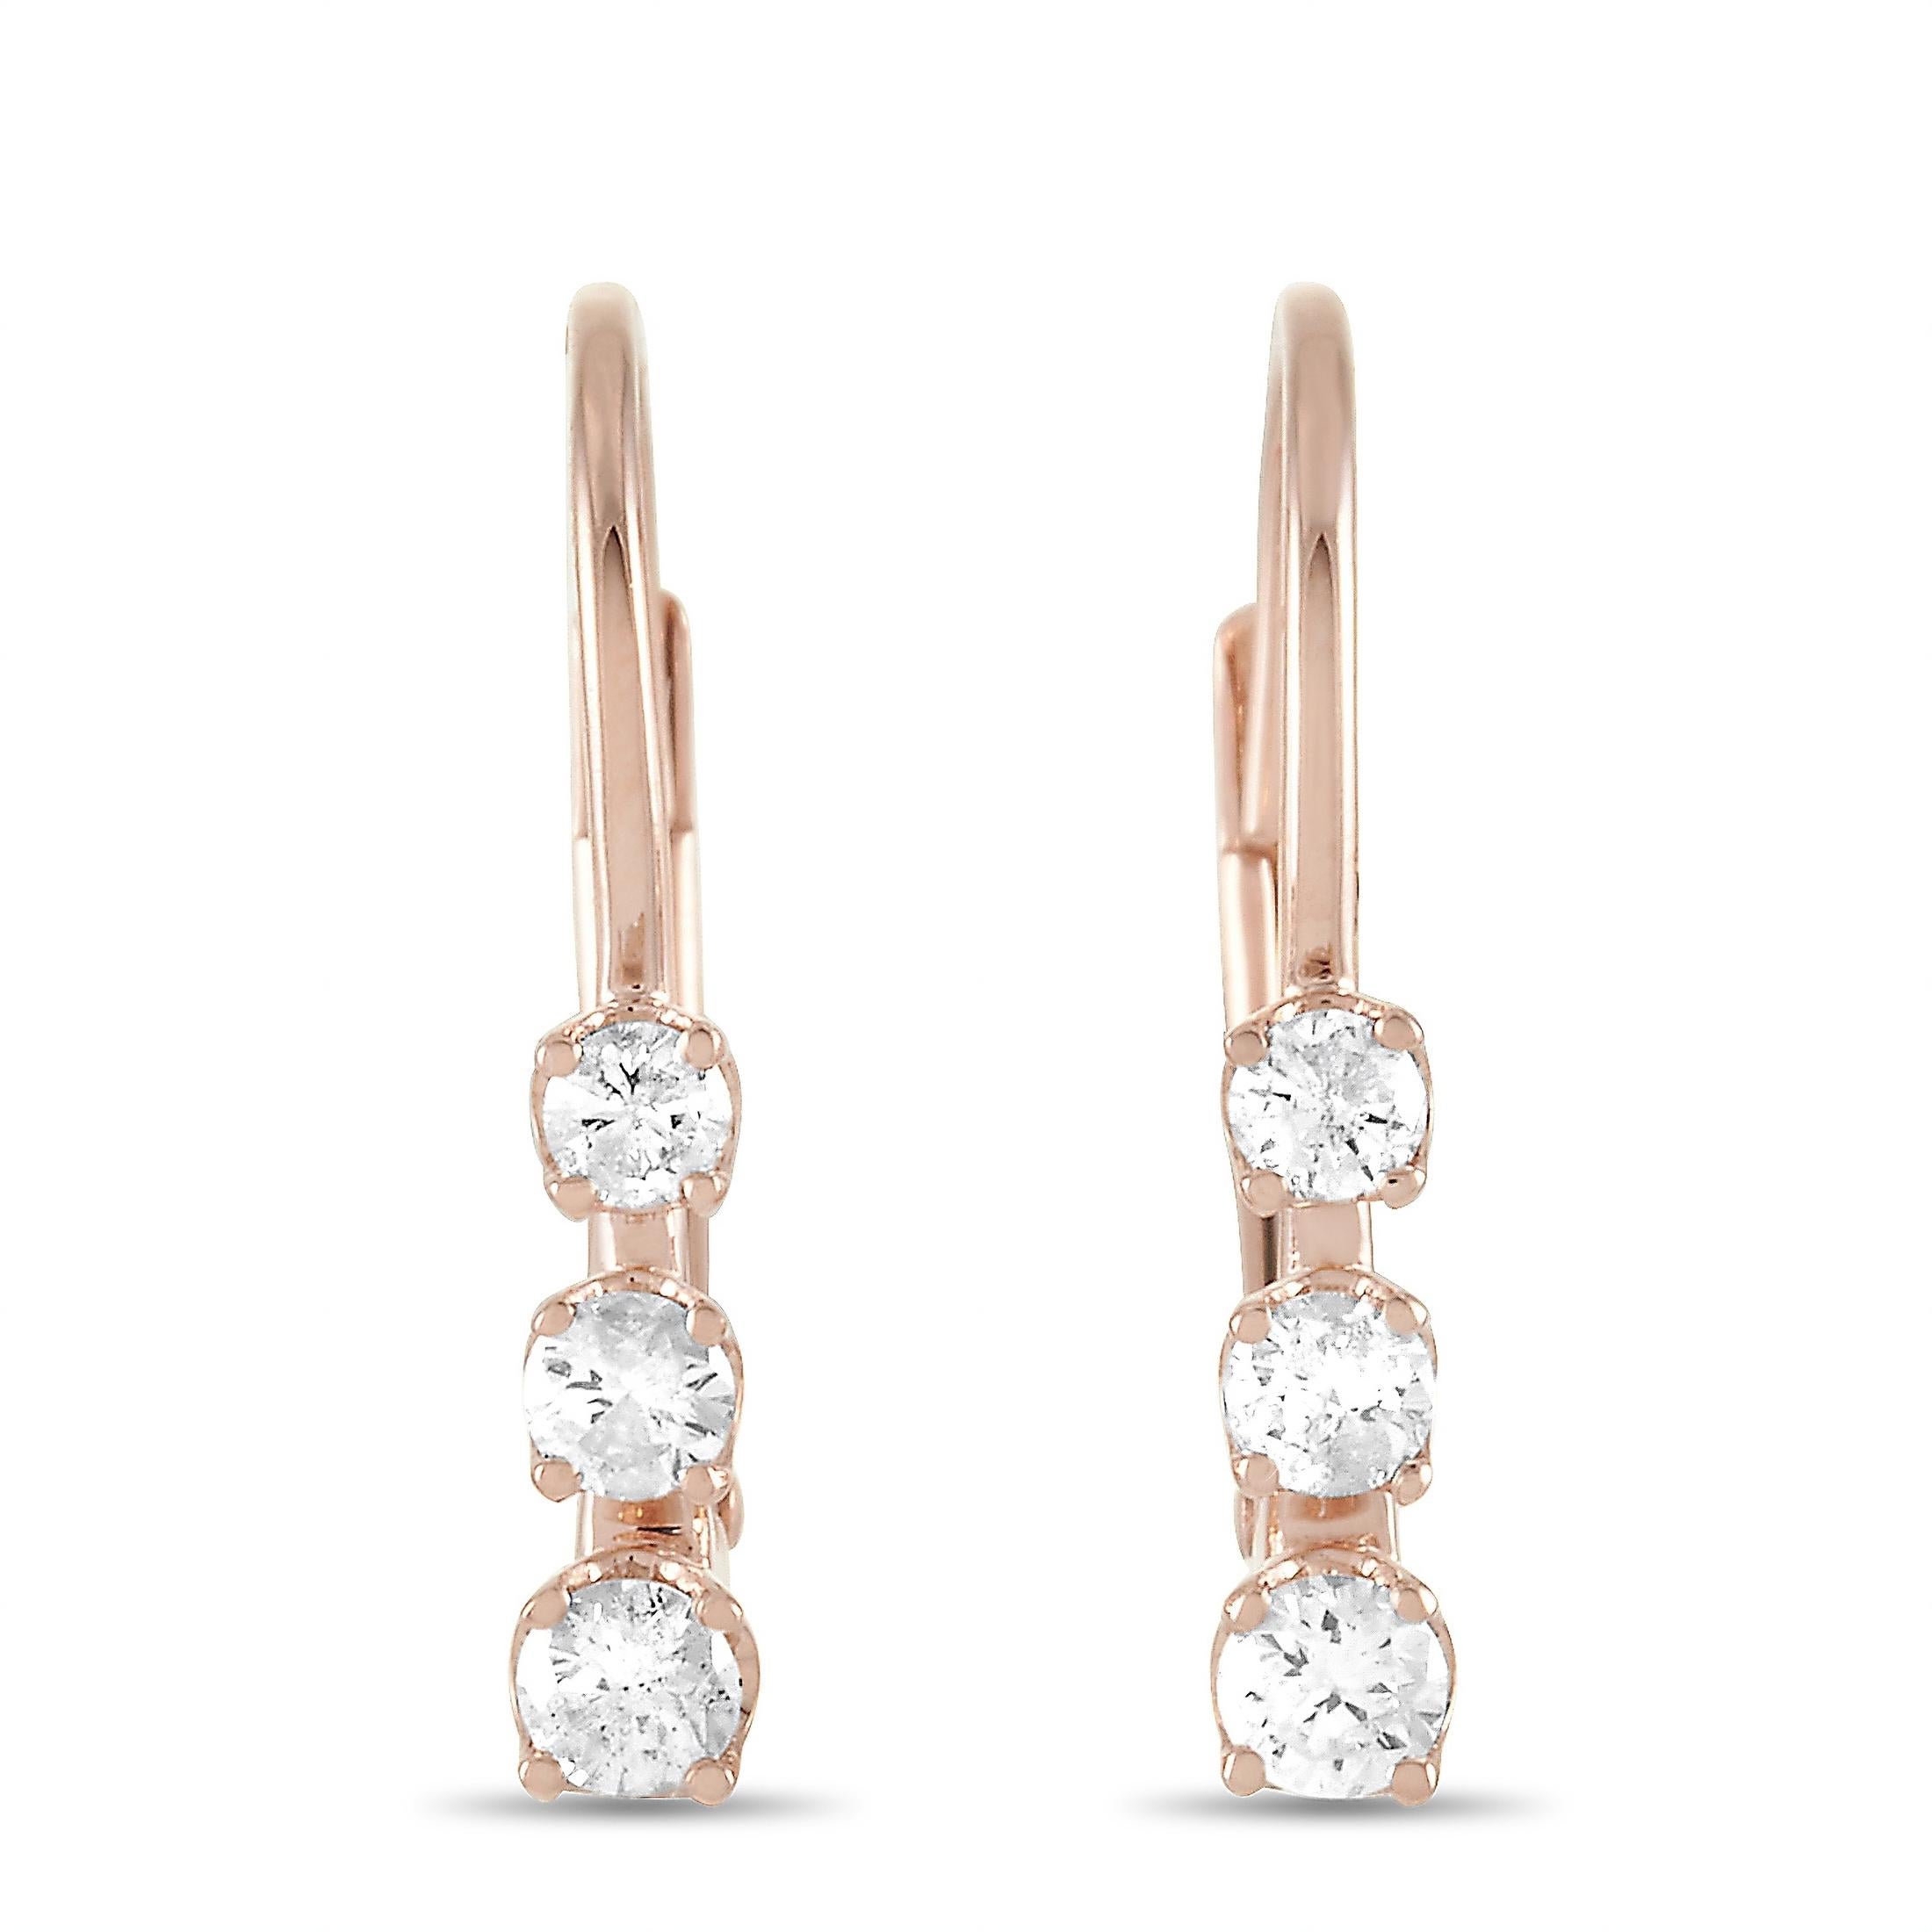 LB Exclusive 14k Rose Gold 0.25 Carat Diamond Earrings In New Condition For Sale In Southampton, PA